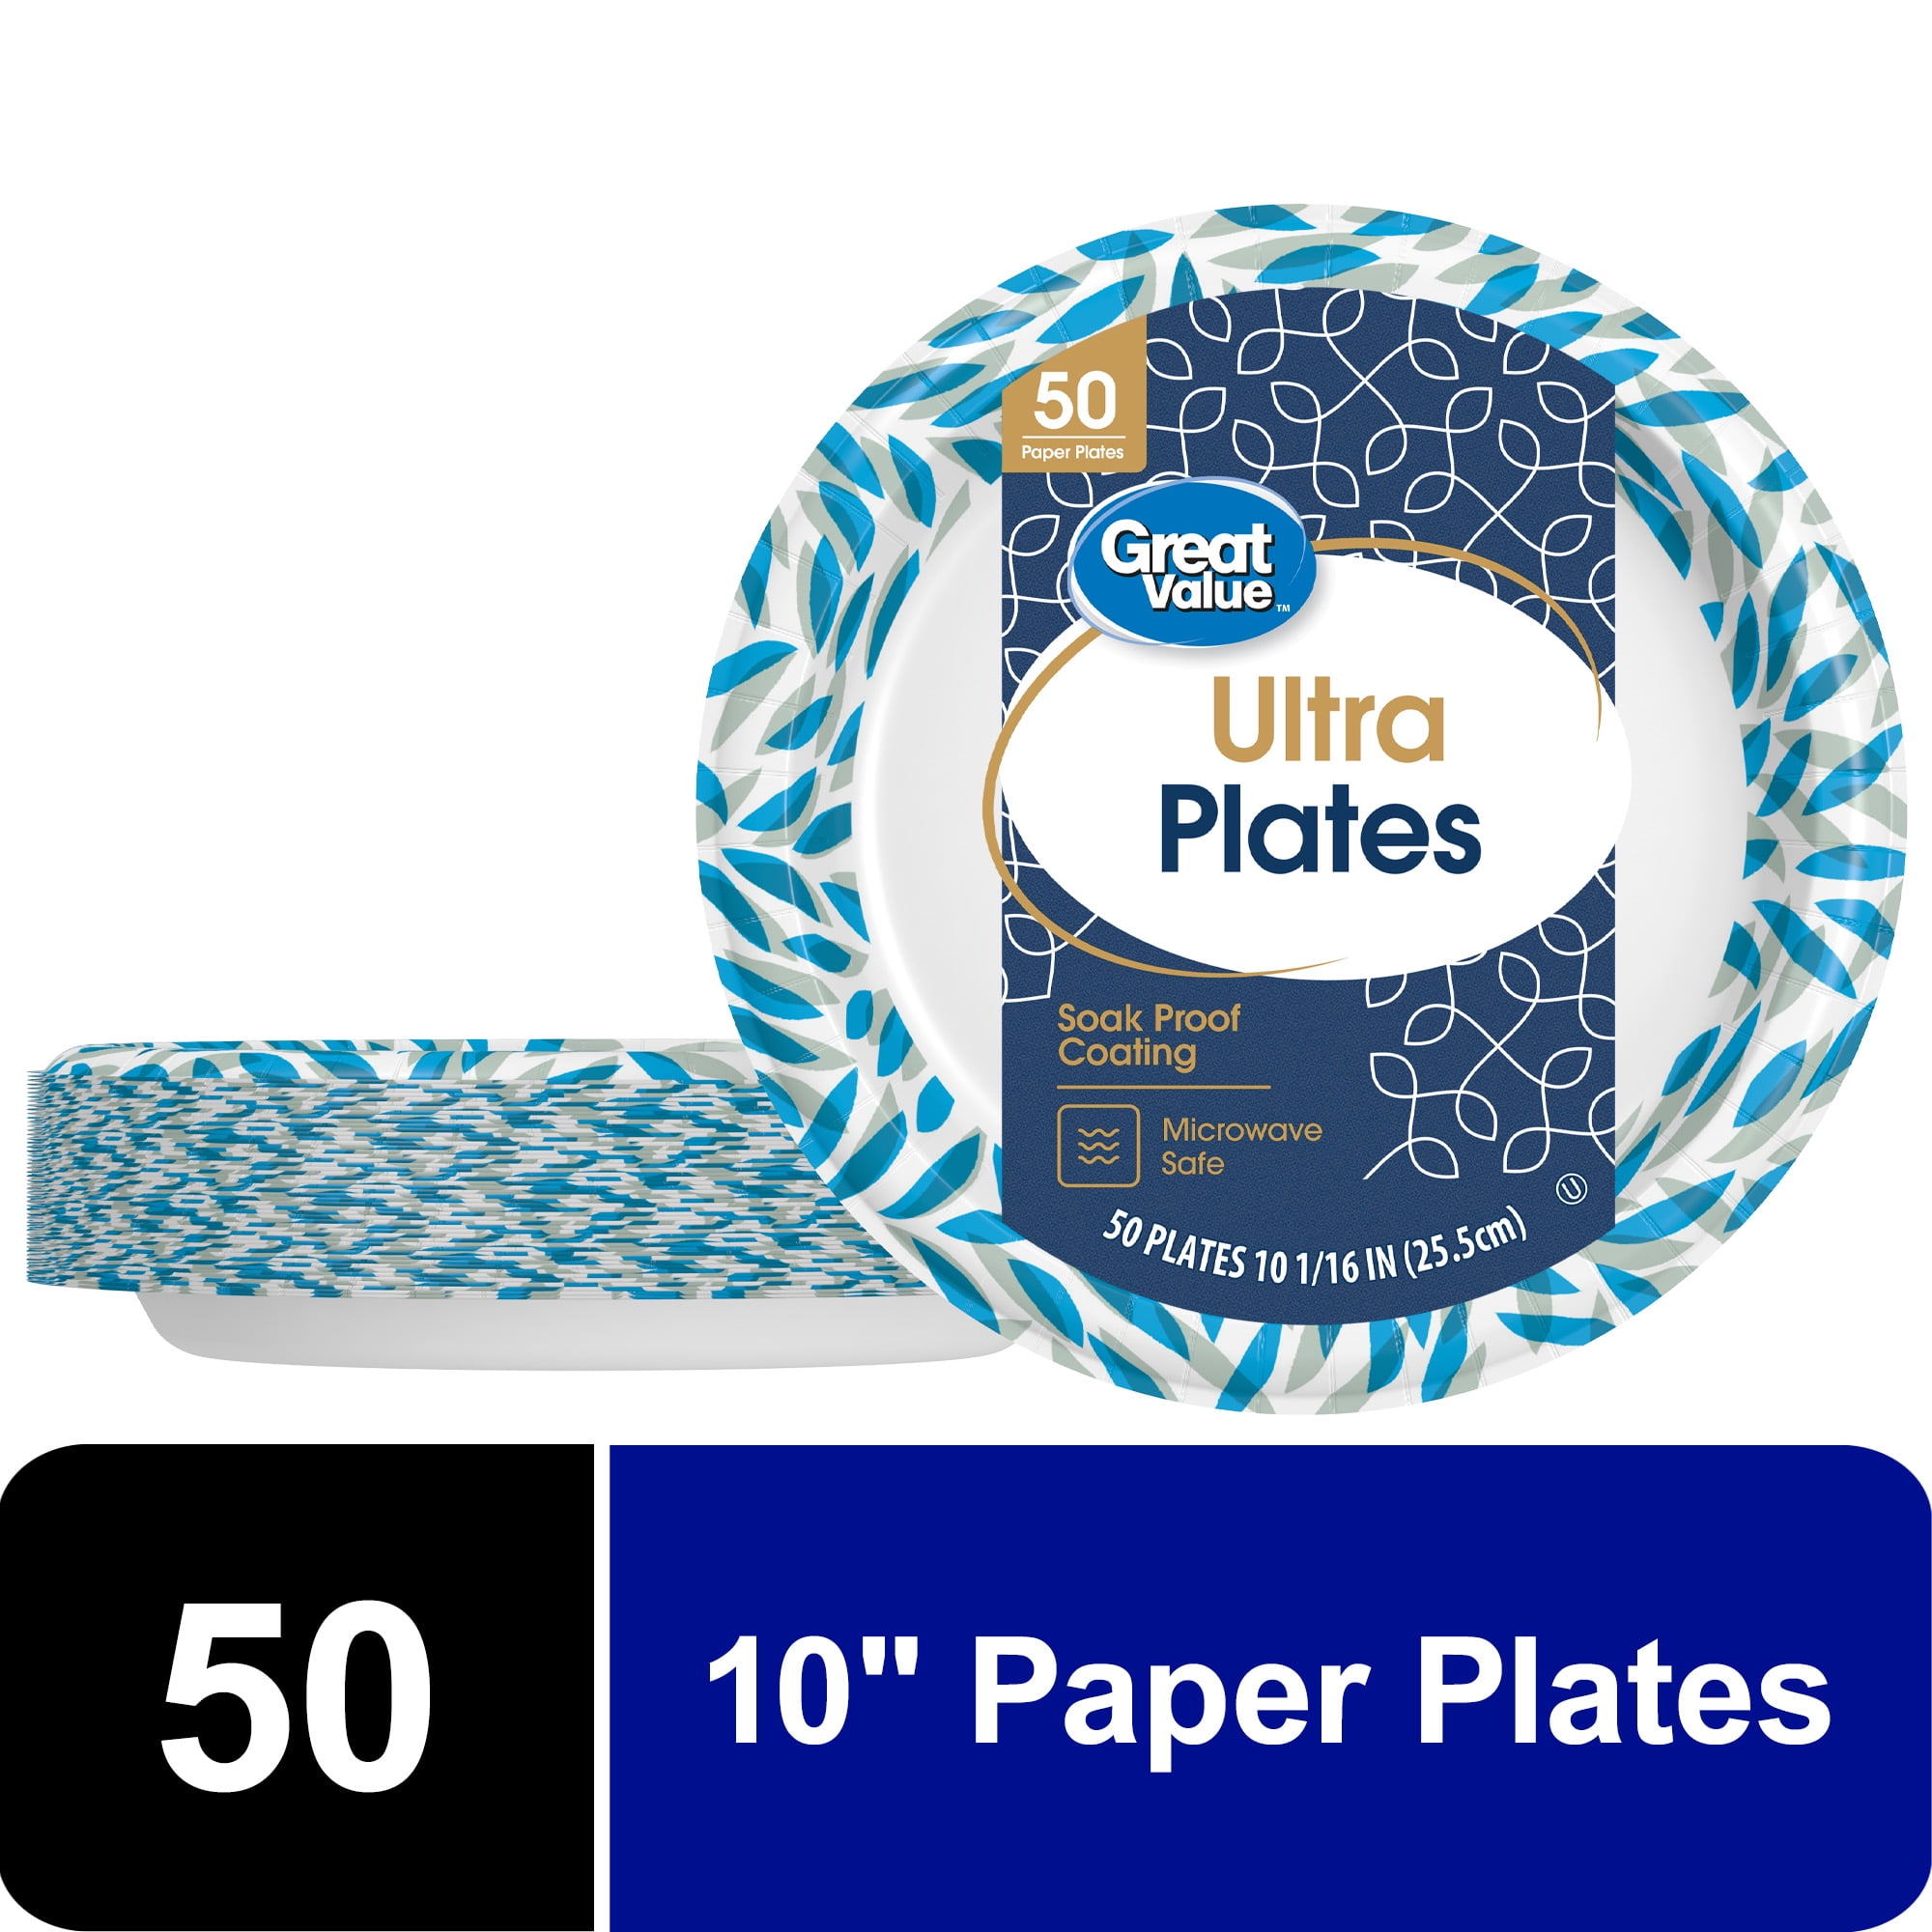 Great Value Economy 6 Paper Plates, 90 count